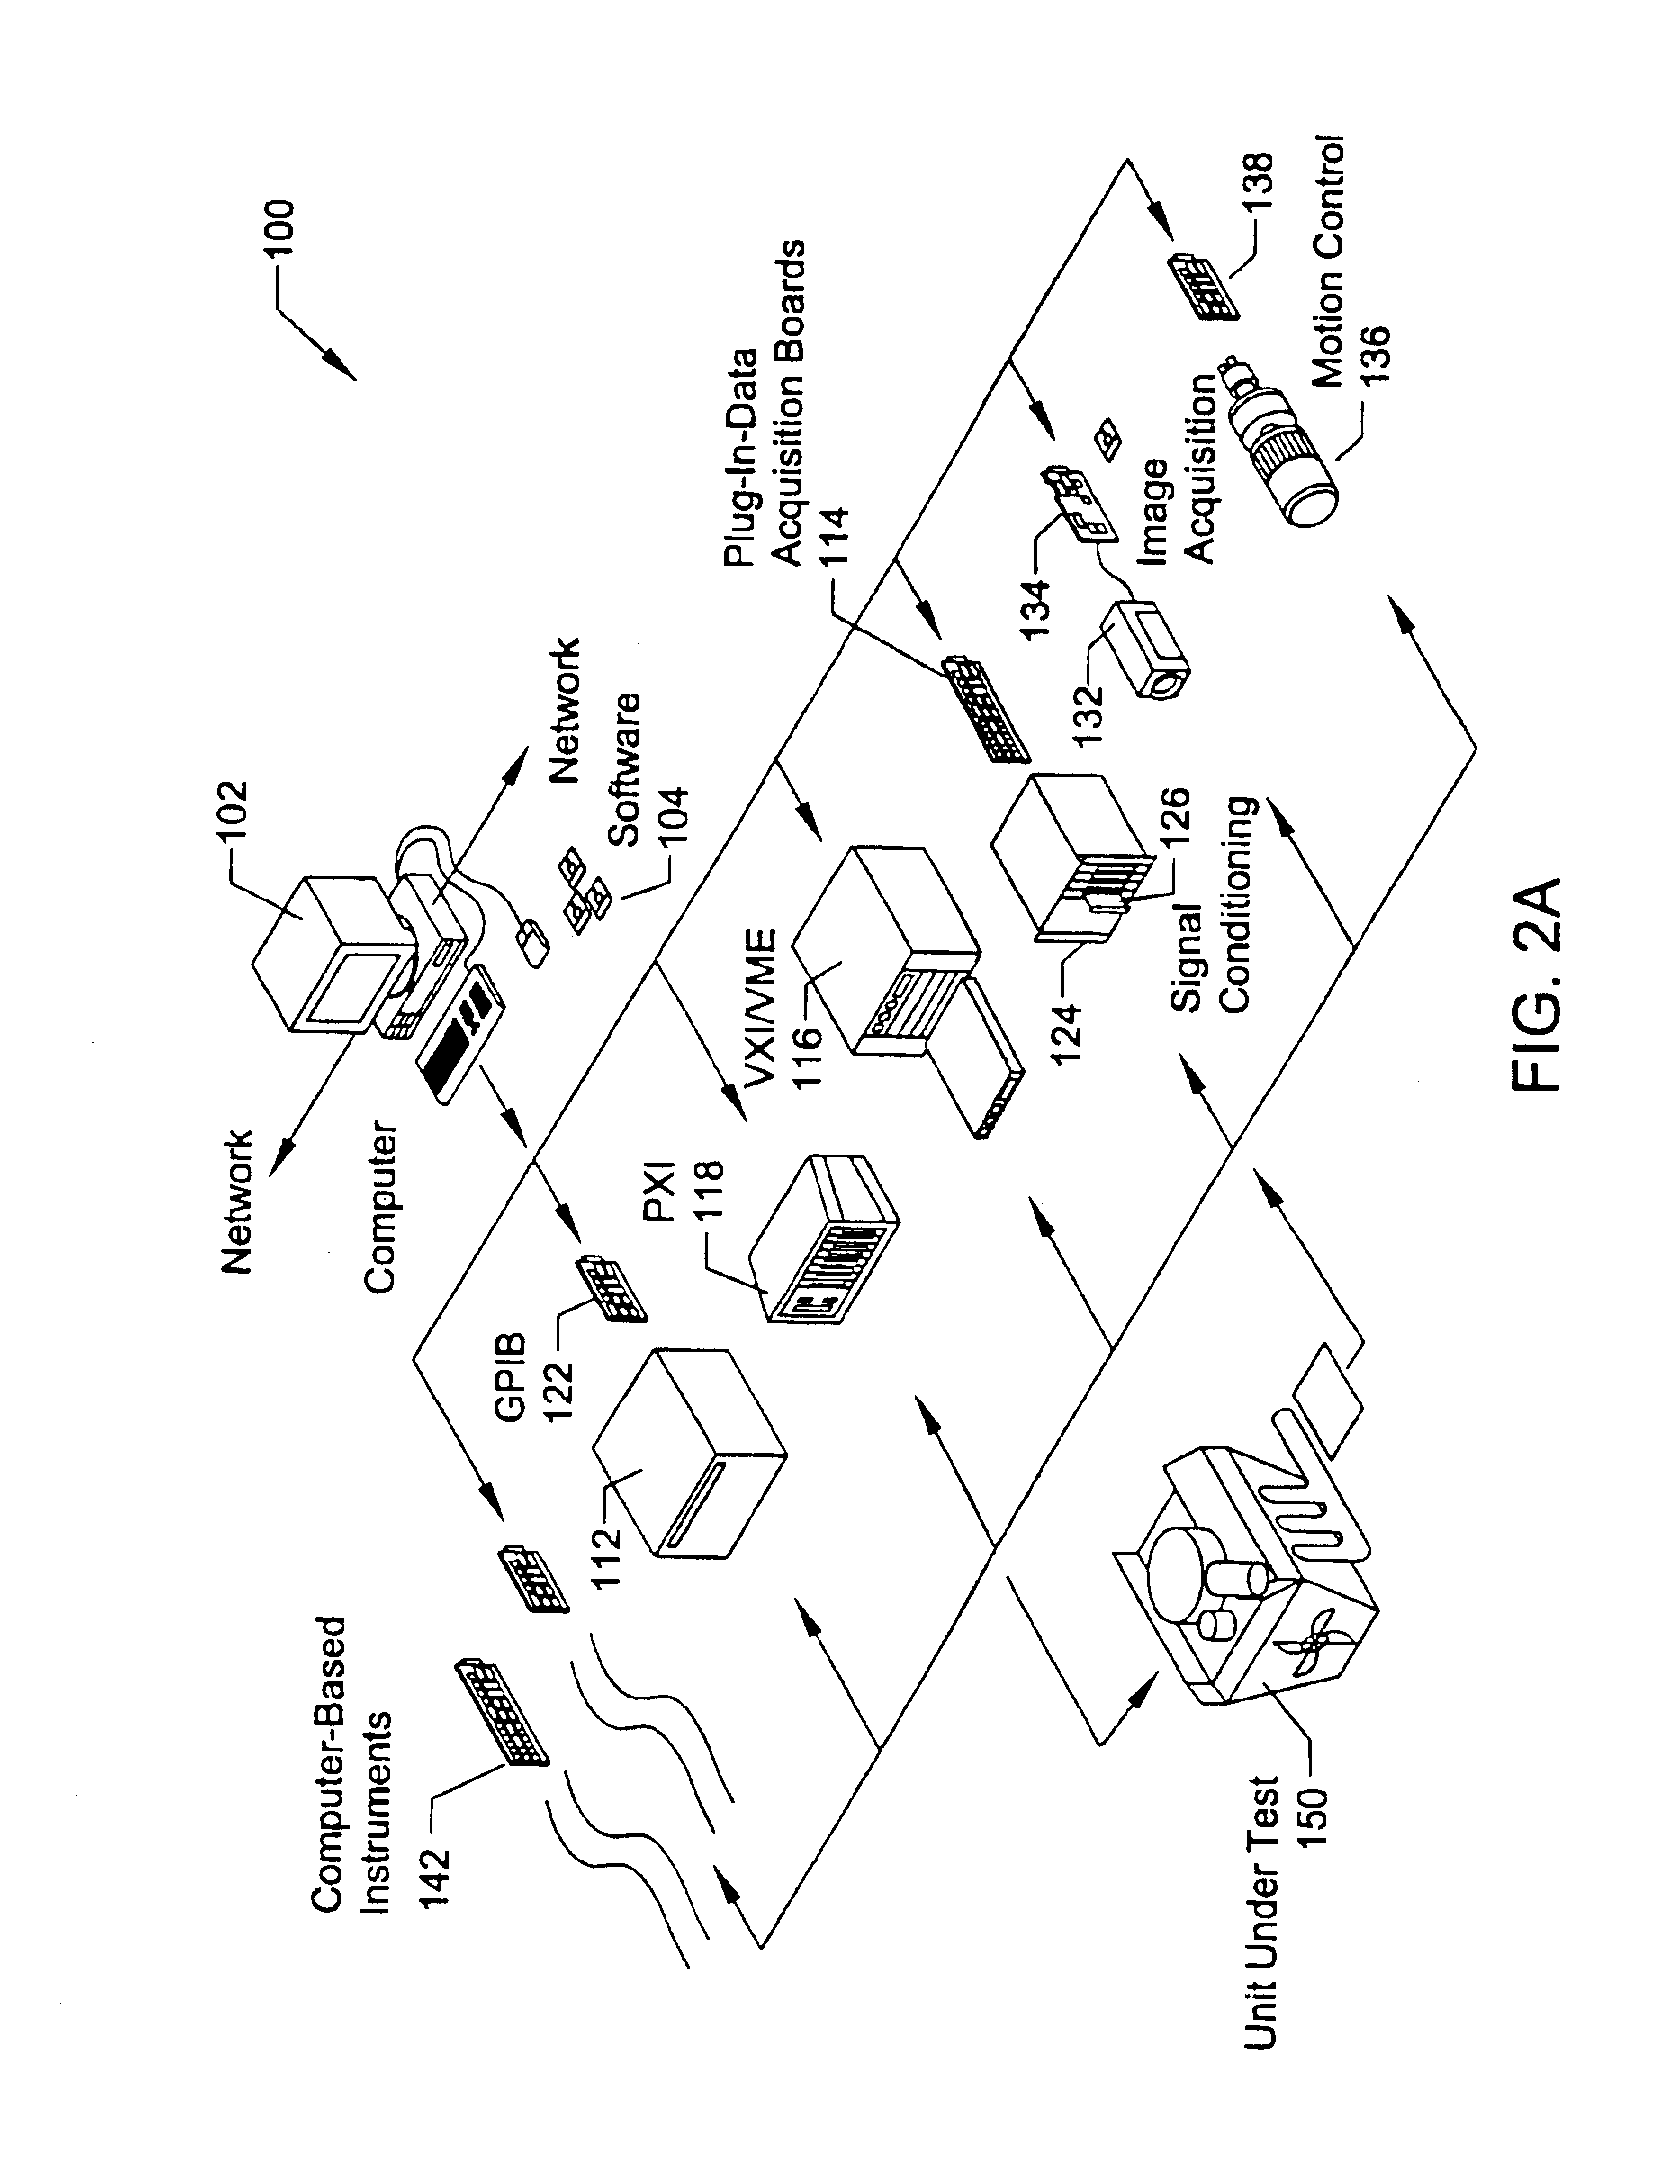 System and method for programmatically generating a second graphical program based on a first graphical program